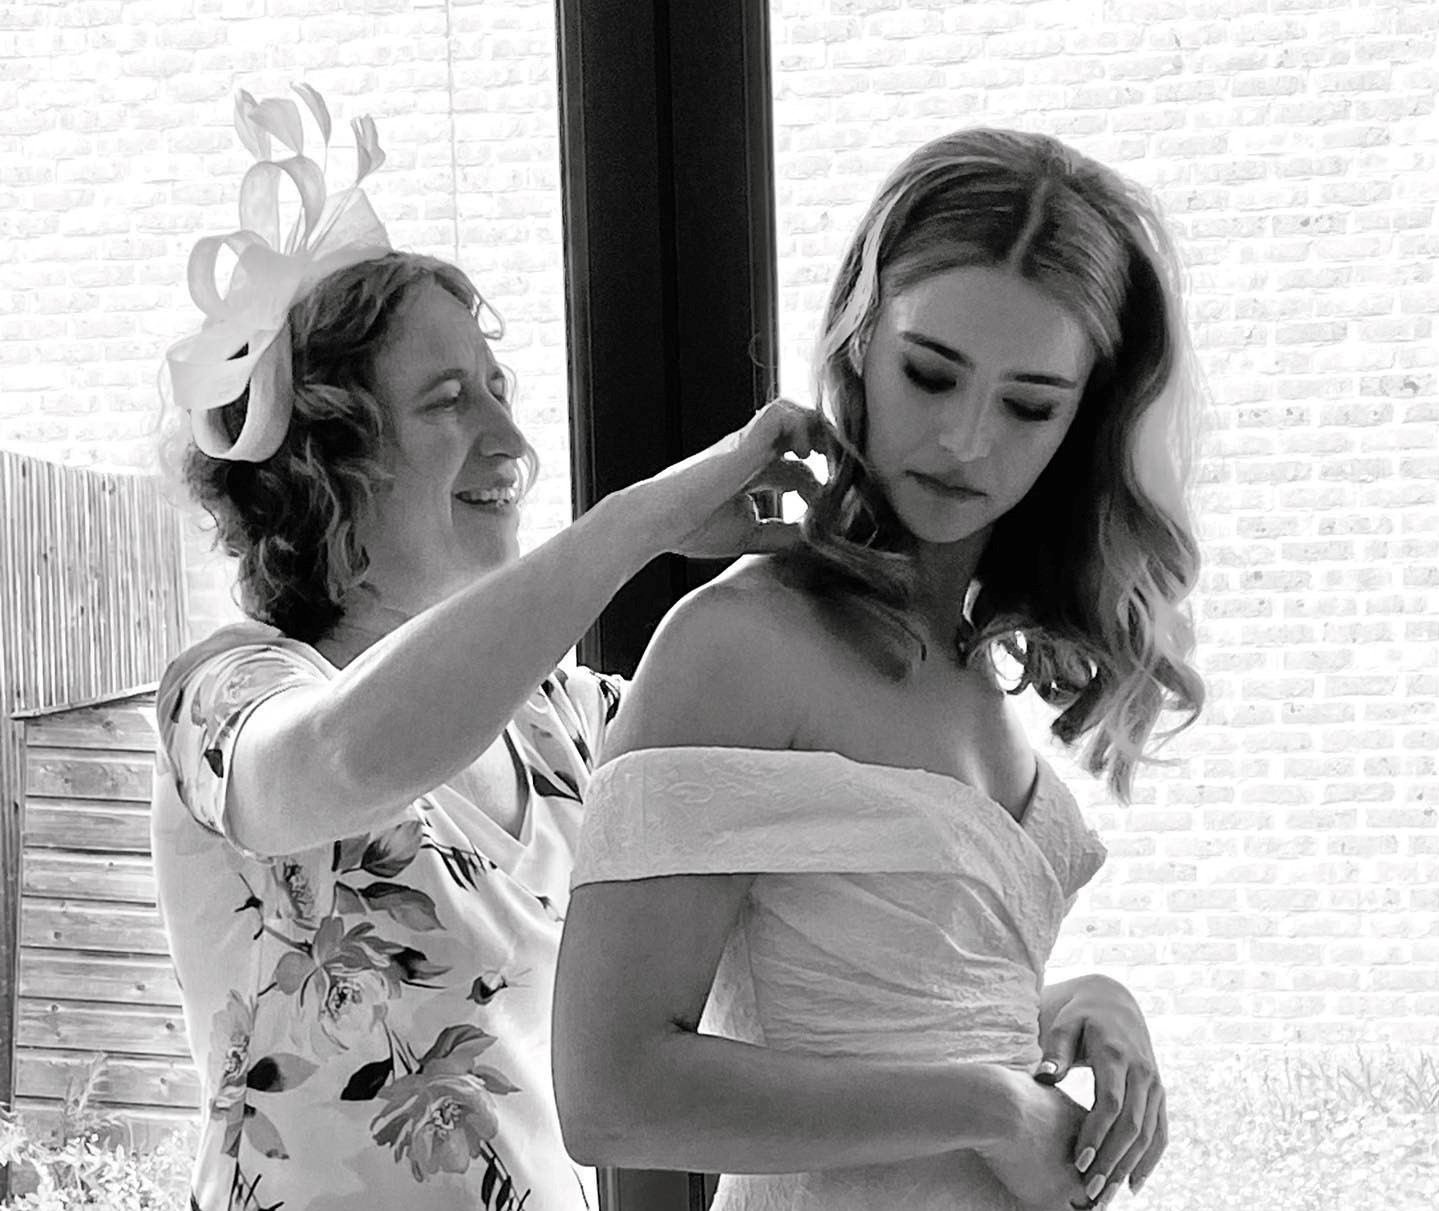 A black and white image shows Rachel, the translator, dressed in a floral print dress and a fancy hat as Mother of the Bride, helping her daughter, who is wearing a wedding dress, to fasten her necklace.